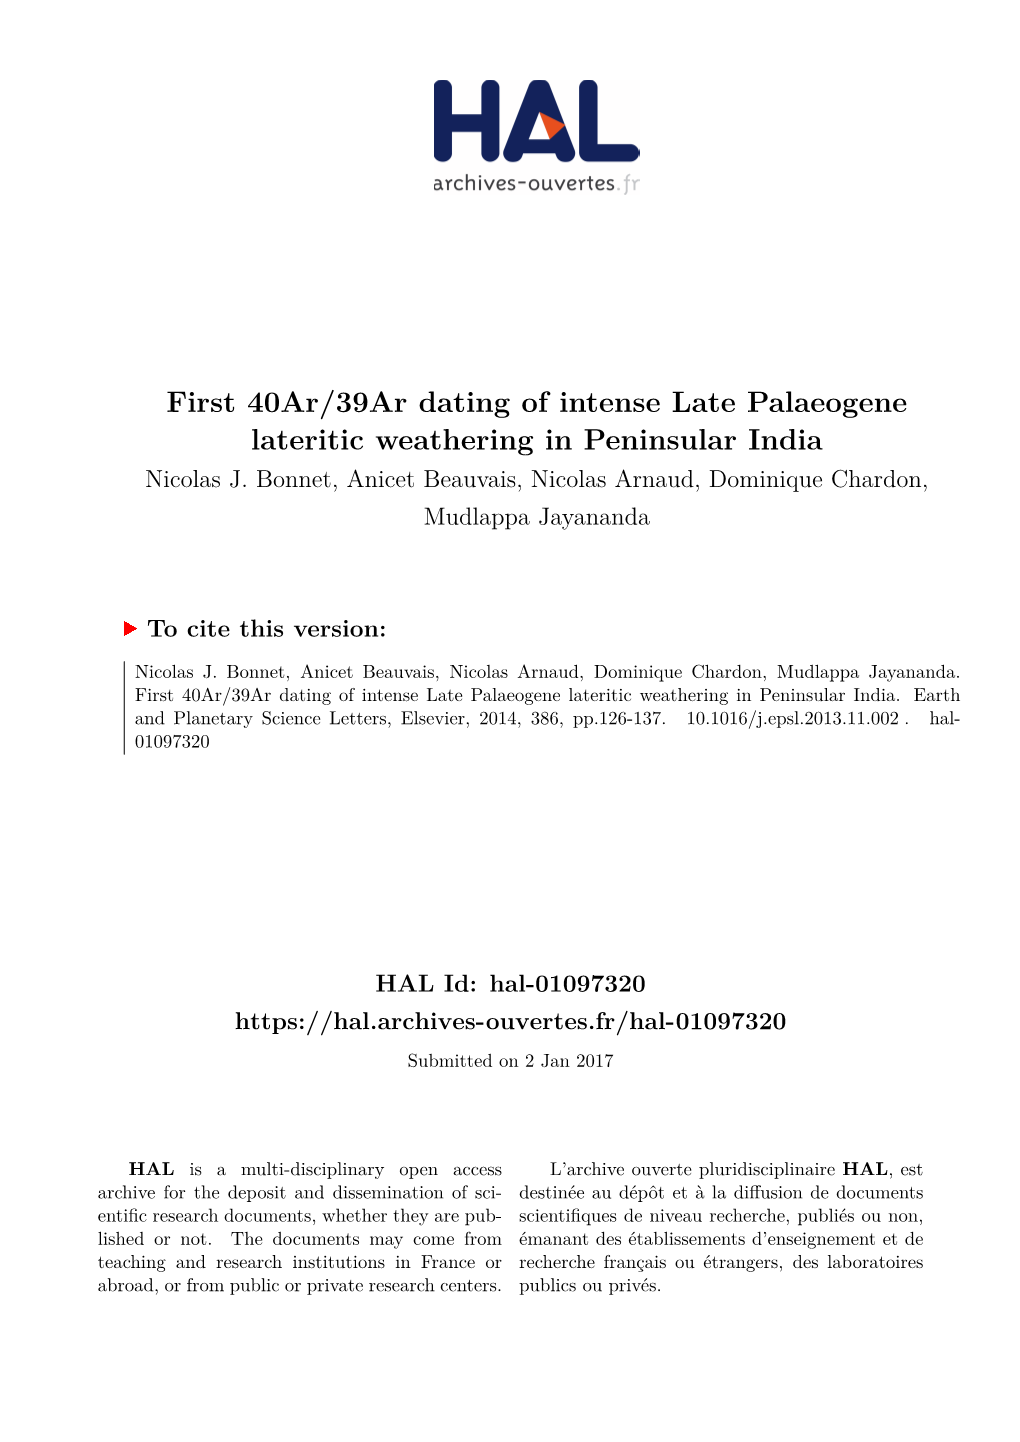 First 40Ar/39Ar Dating of Intense Late Palaeogene Lateritic Weathering in Peninsular India Nicolas J